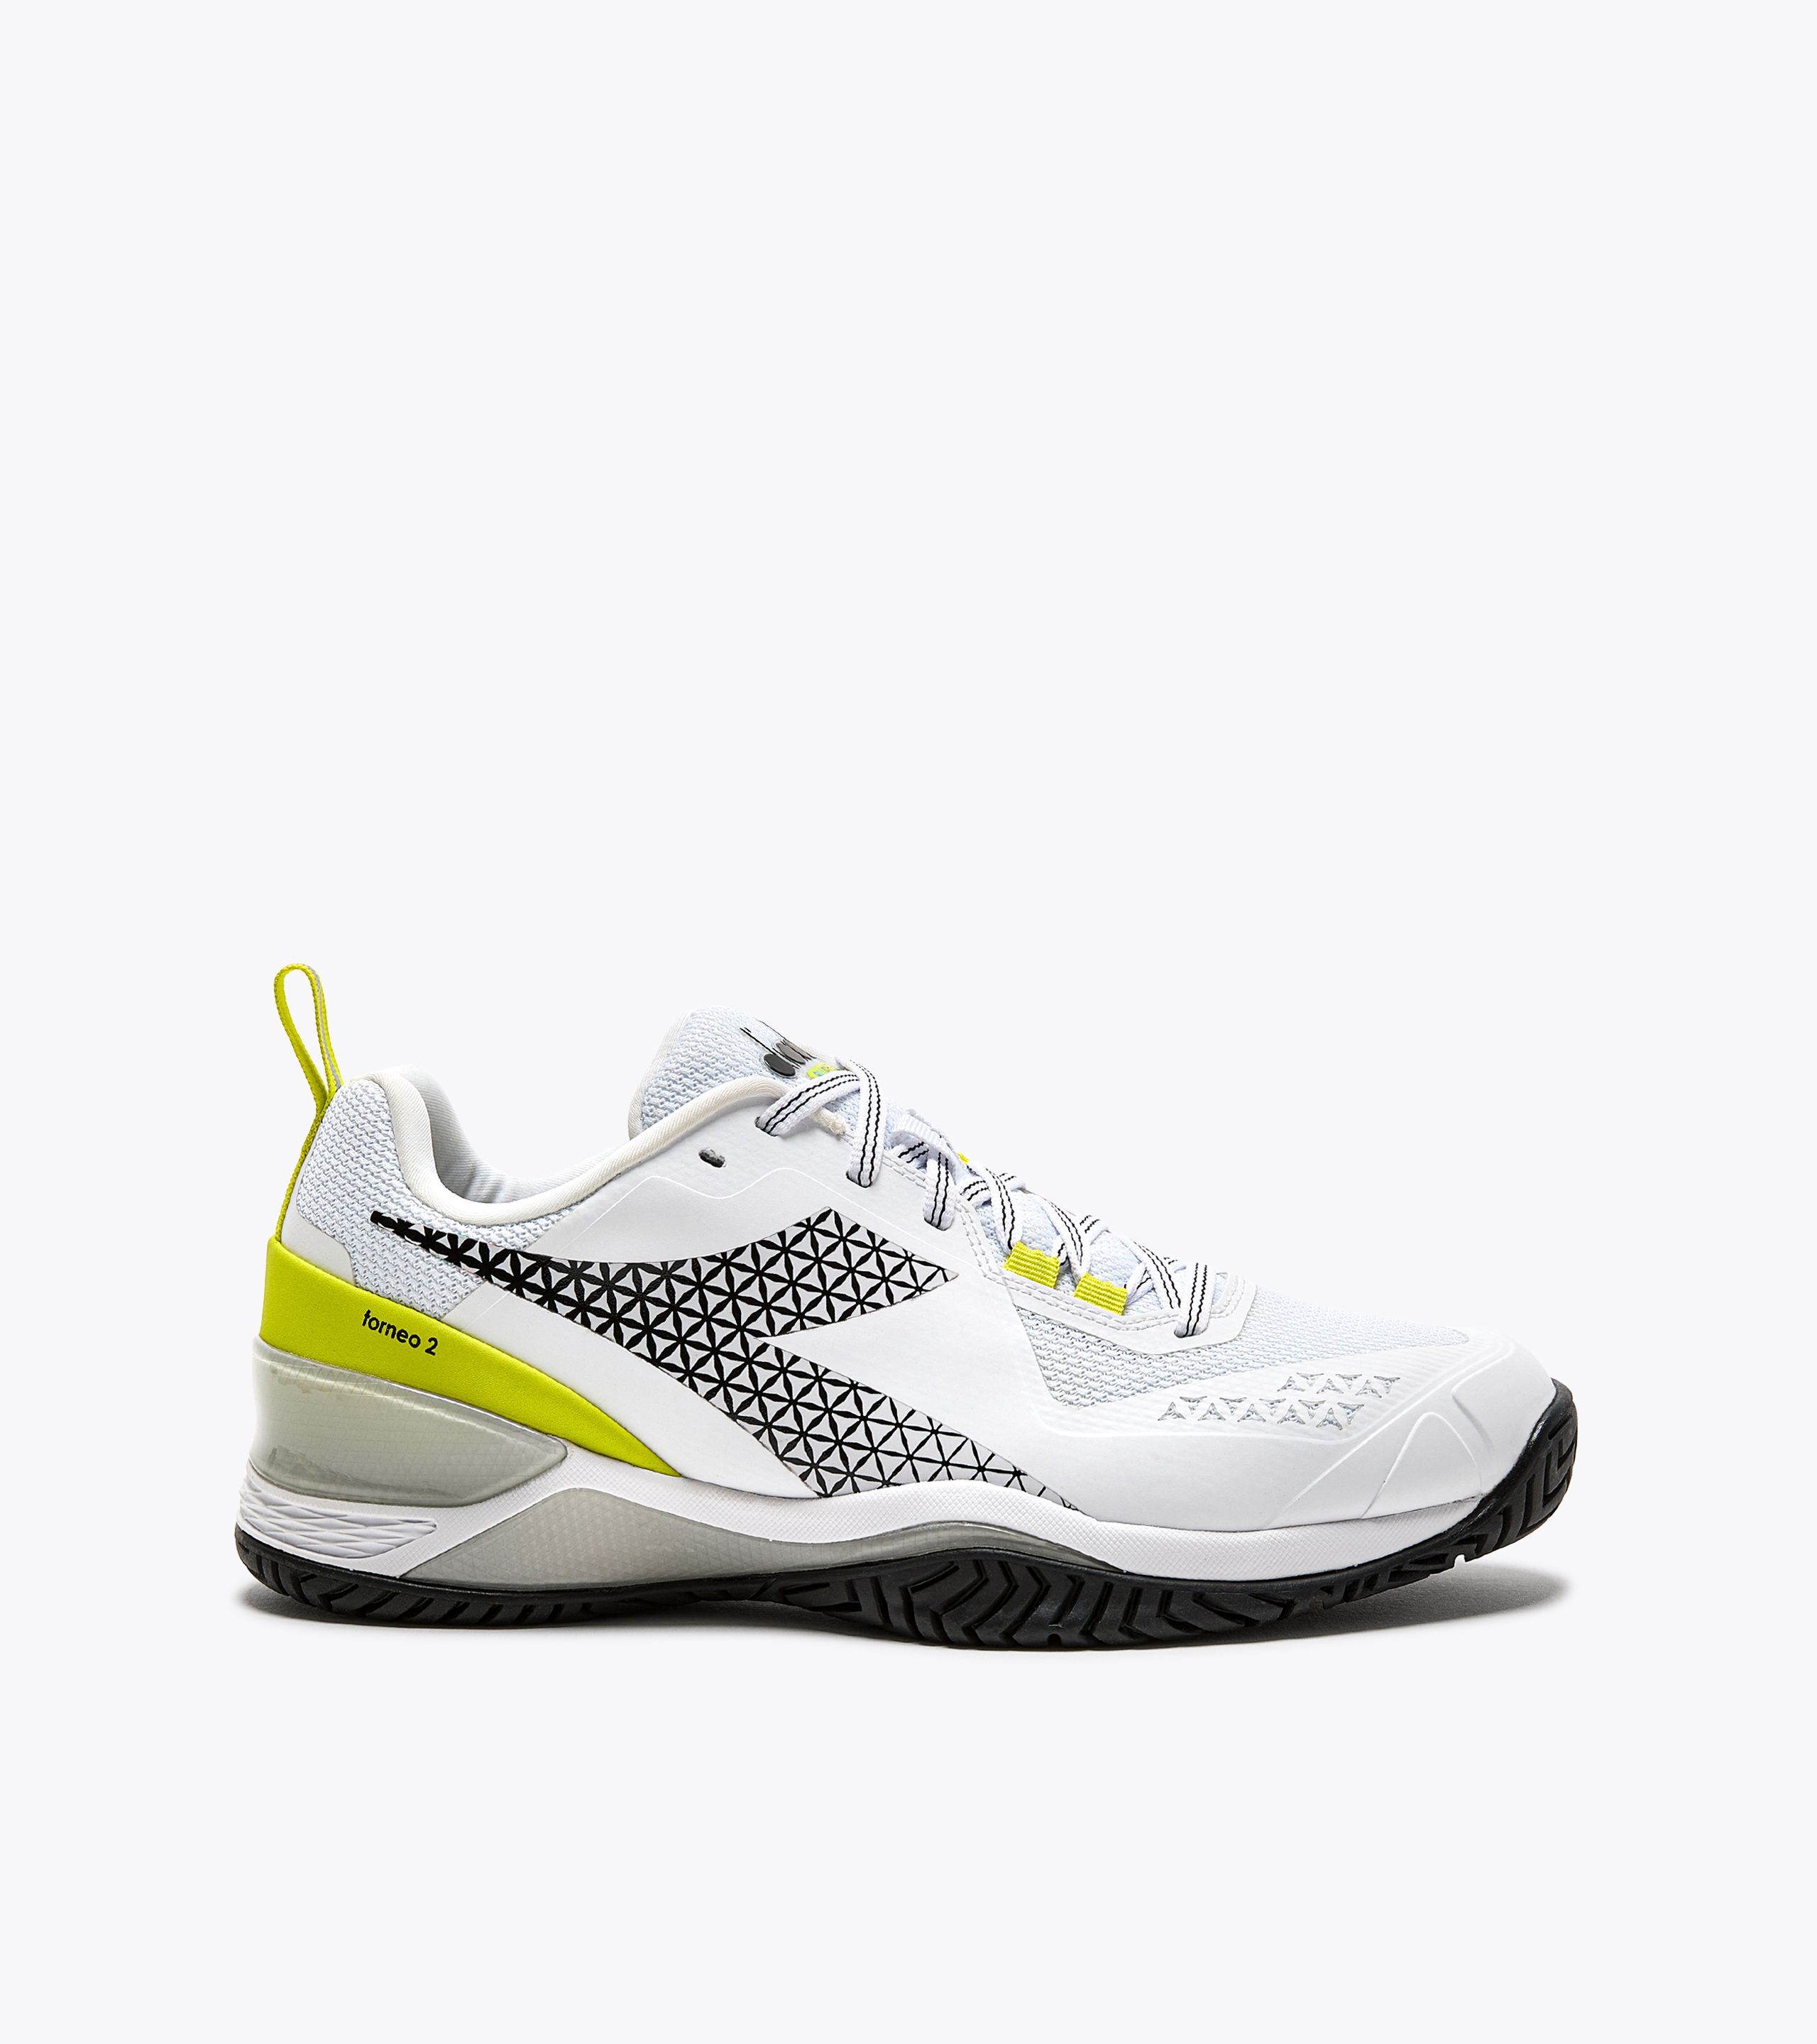 Diadora STEP P DOUBLE FUR Women's sneakers: for sale at 53.99€ on  Mecshopping.it